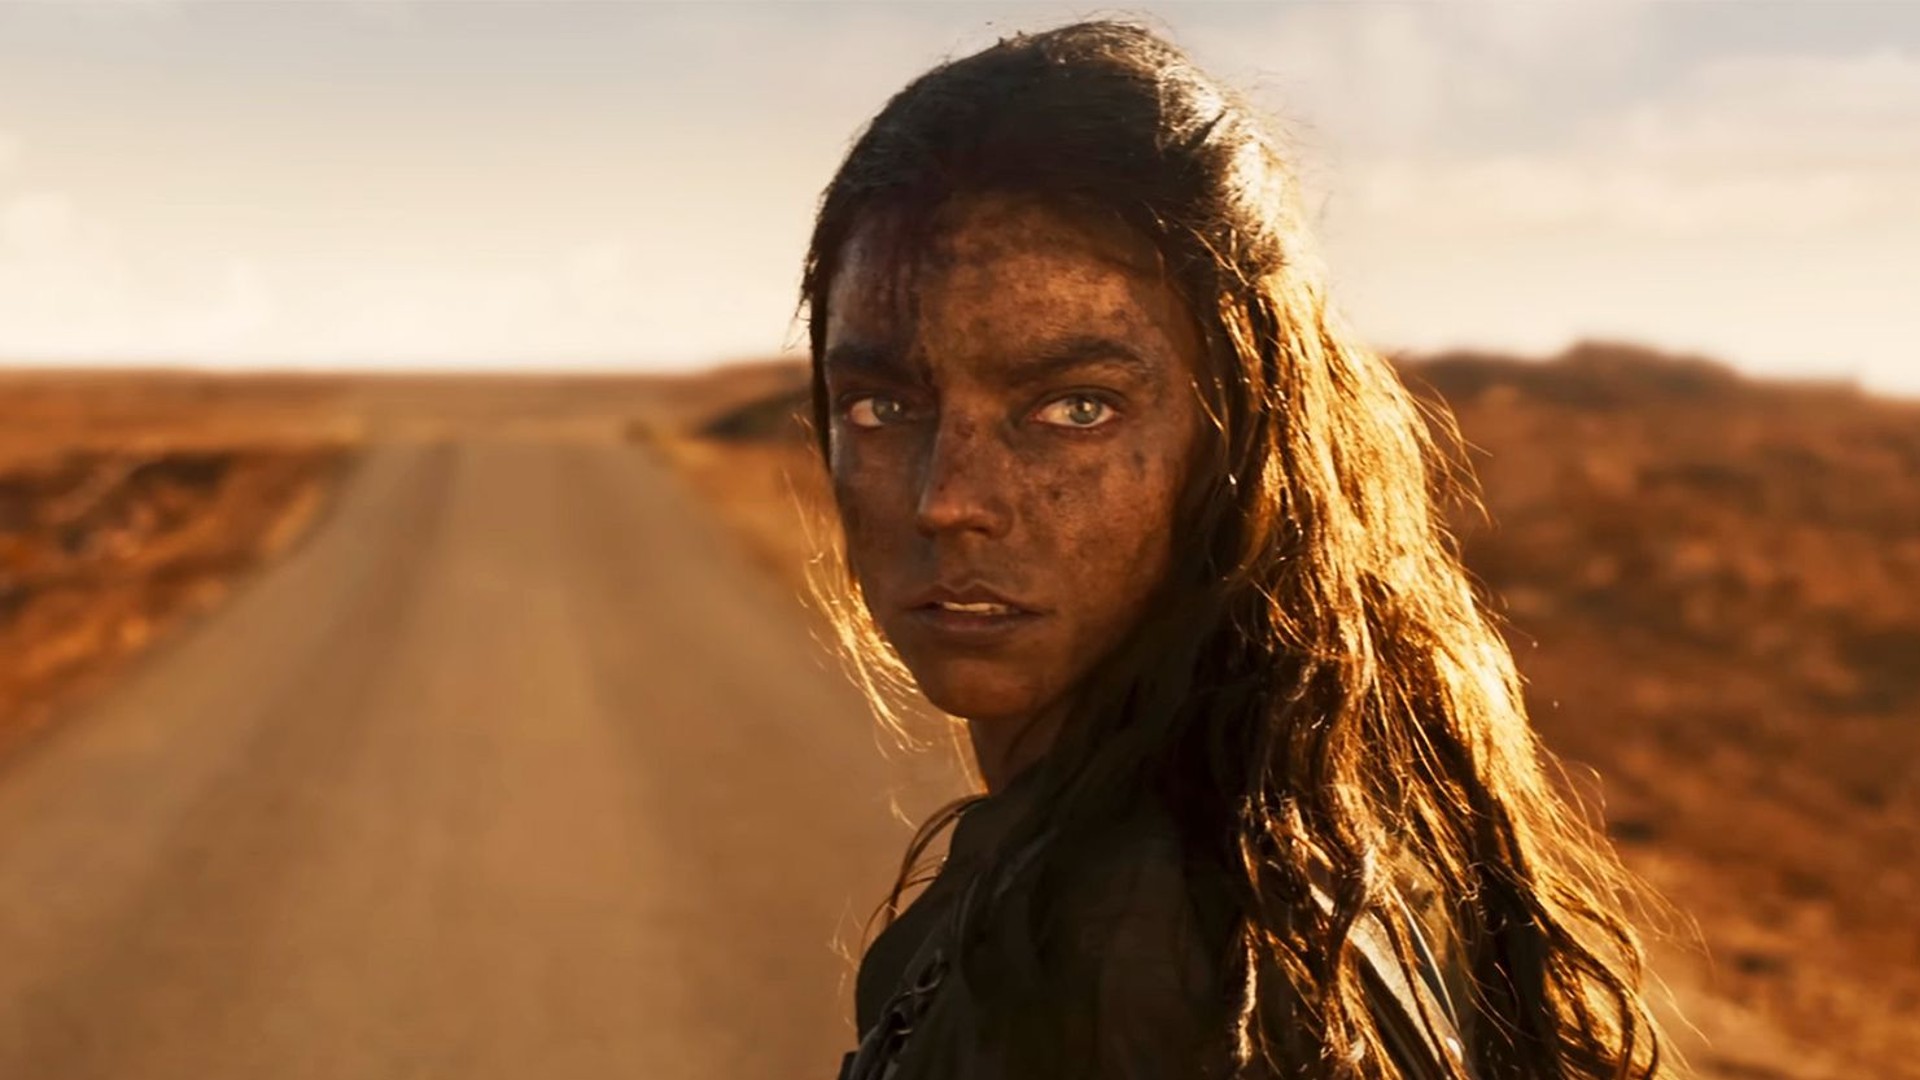 Anya Taylor-Joy stands on a dusty road and glances over her shoulder in a still from Furiosa: A Mad Max Saga.